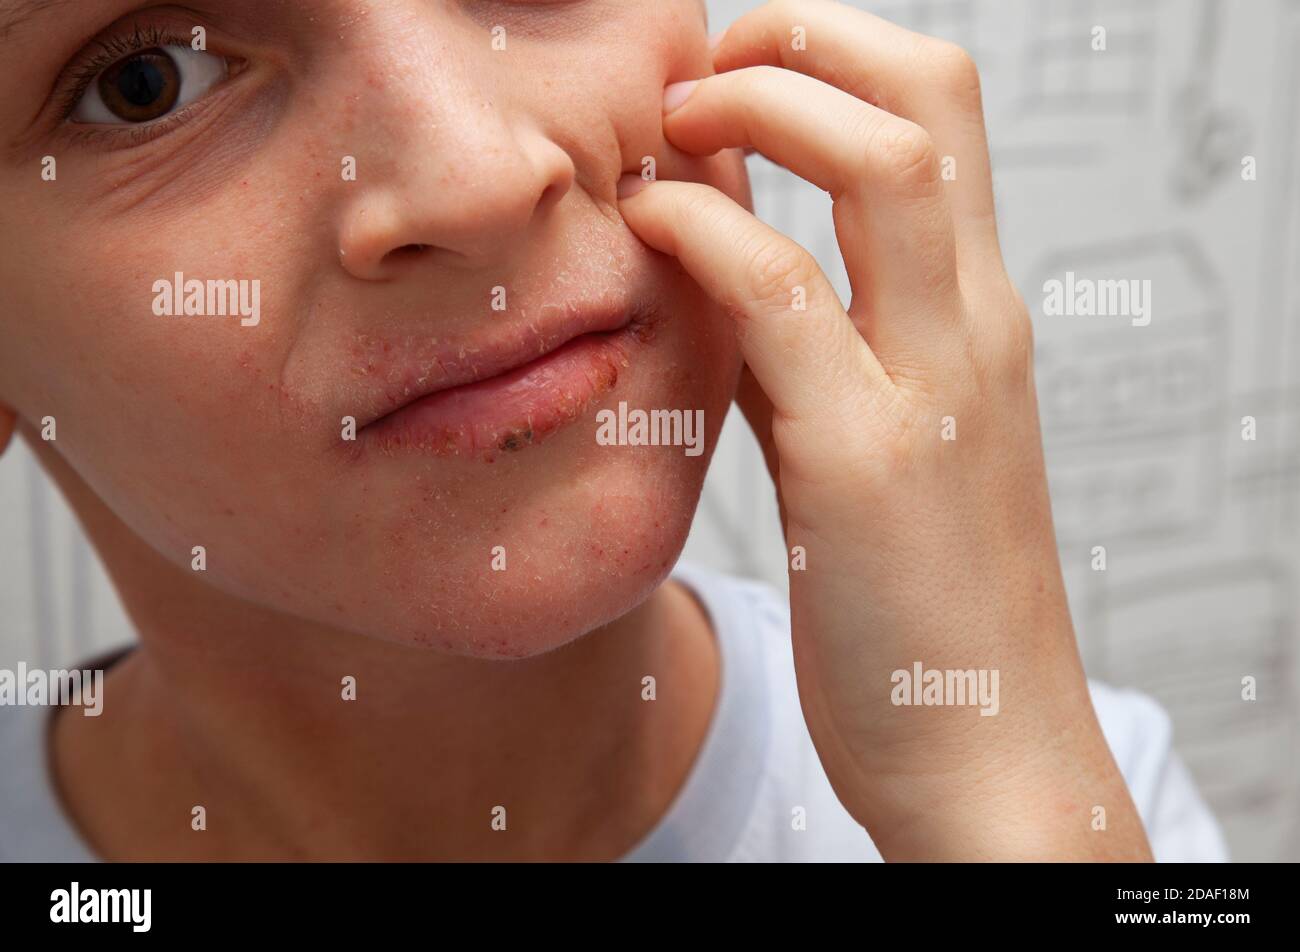 Atopic skin on the boy face. Human skin, presenting an allergic reaction, allergic rash on face and lips. Health care and medicine concept. Stock Photo